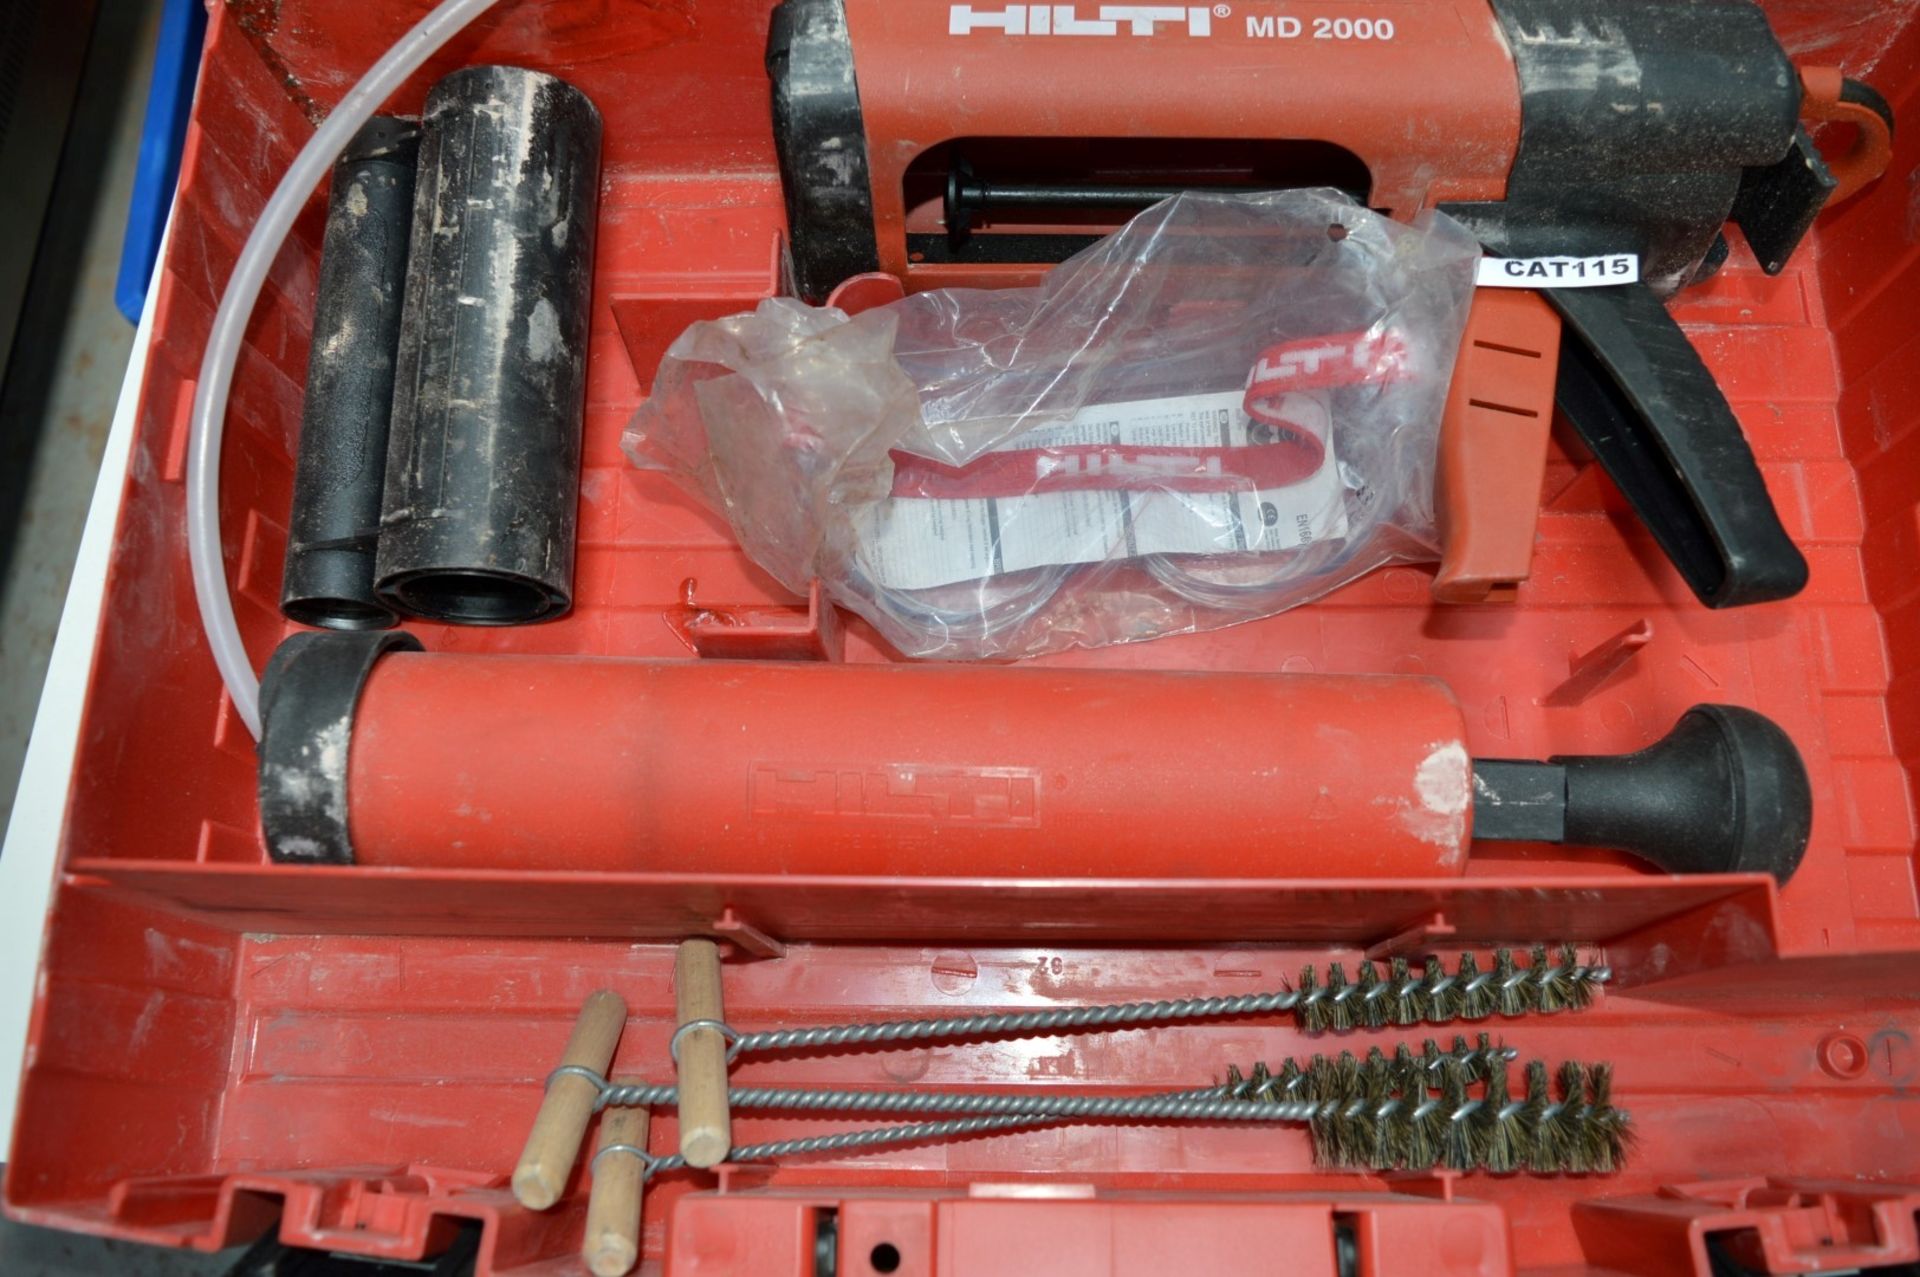 1 x Hilti MD2000 Manual HIT Adhesive Dispenser With Case, Pump, Brushes and Goggles - CL300 - Ref - Image 3 of 4